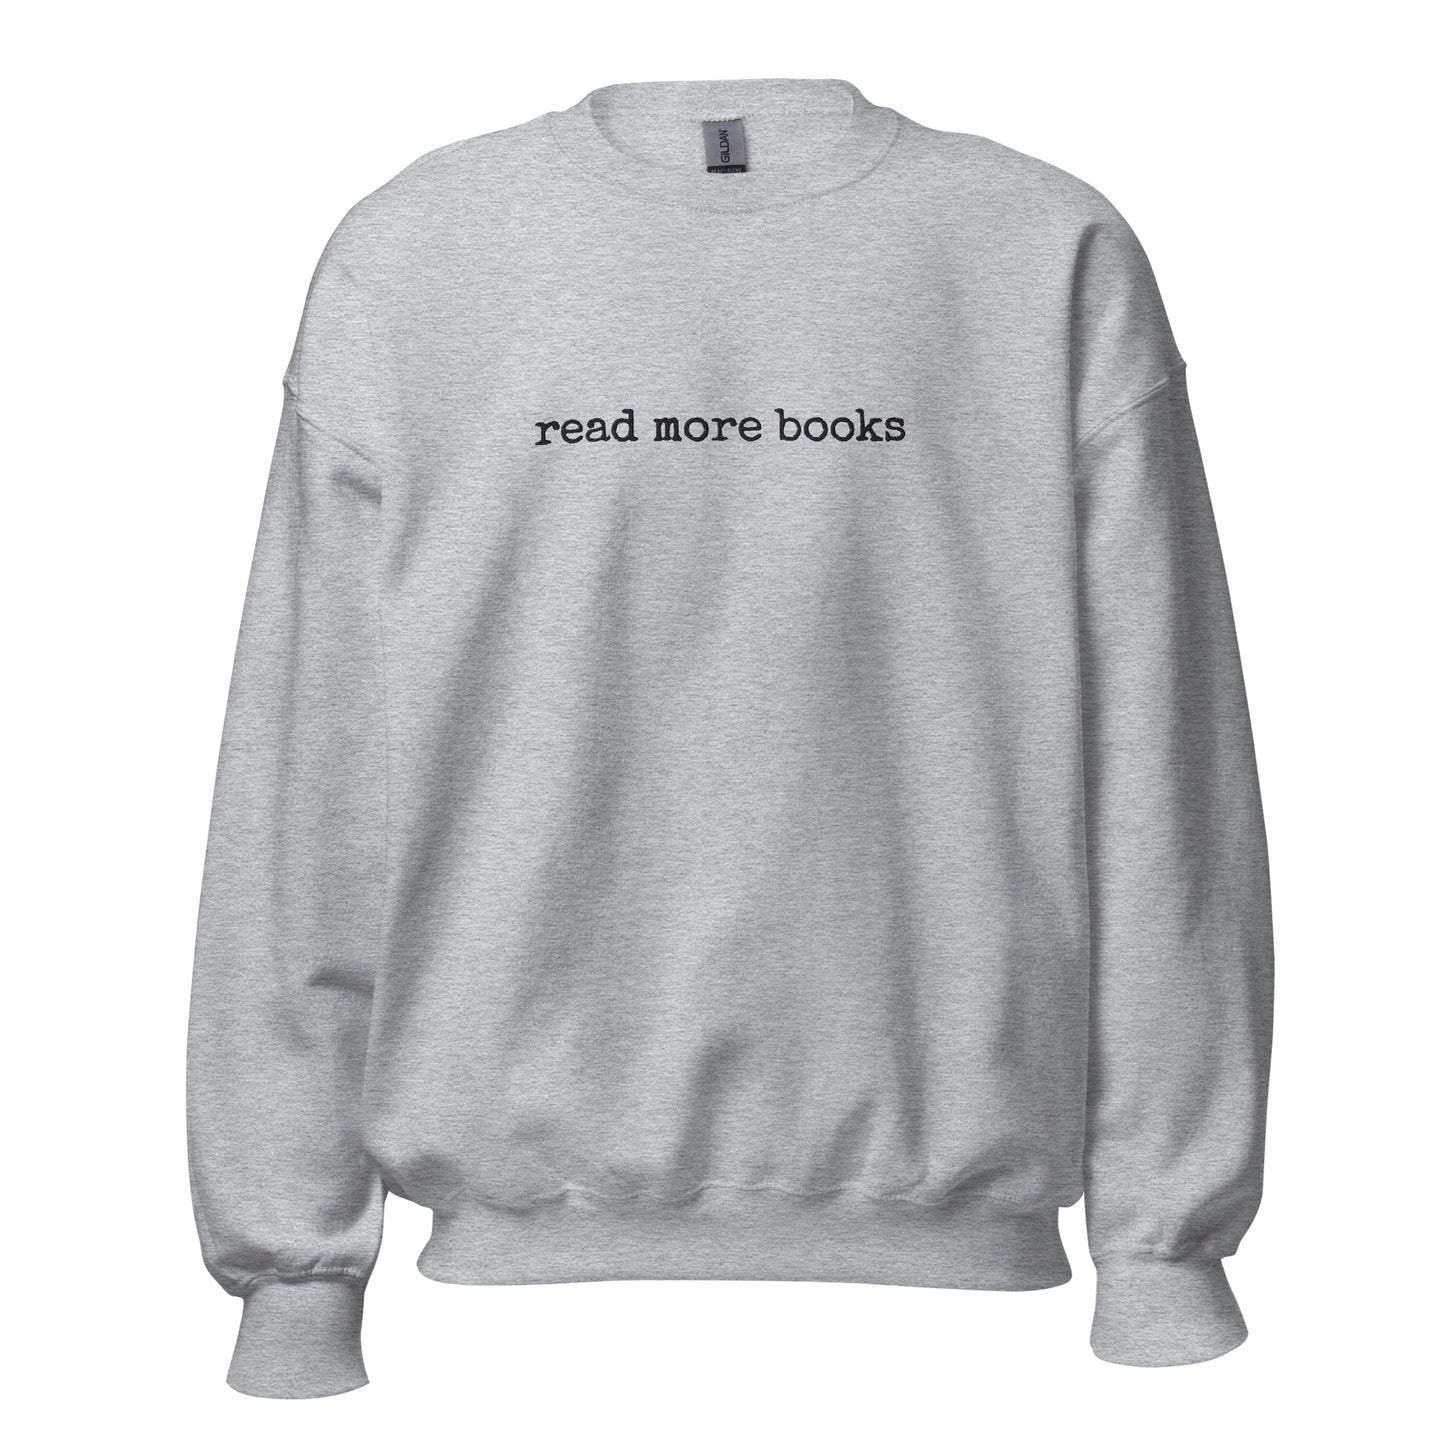 read more books embroidered sweatshirt